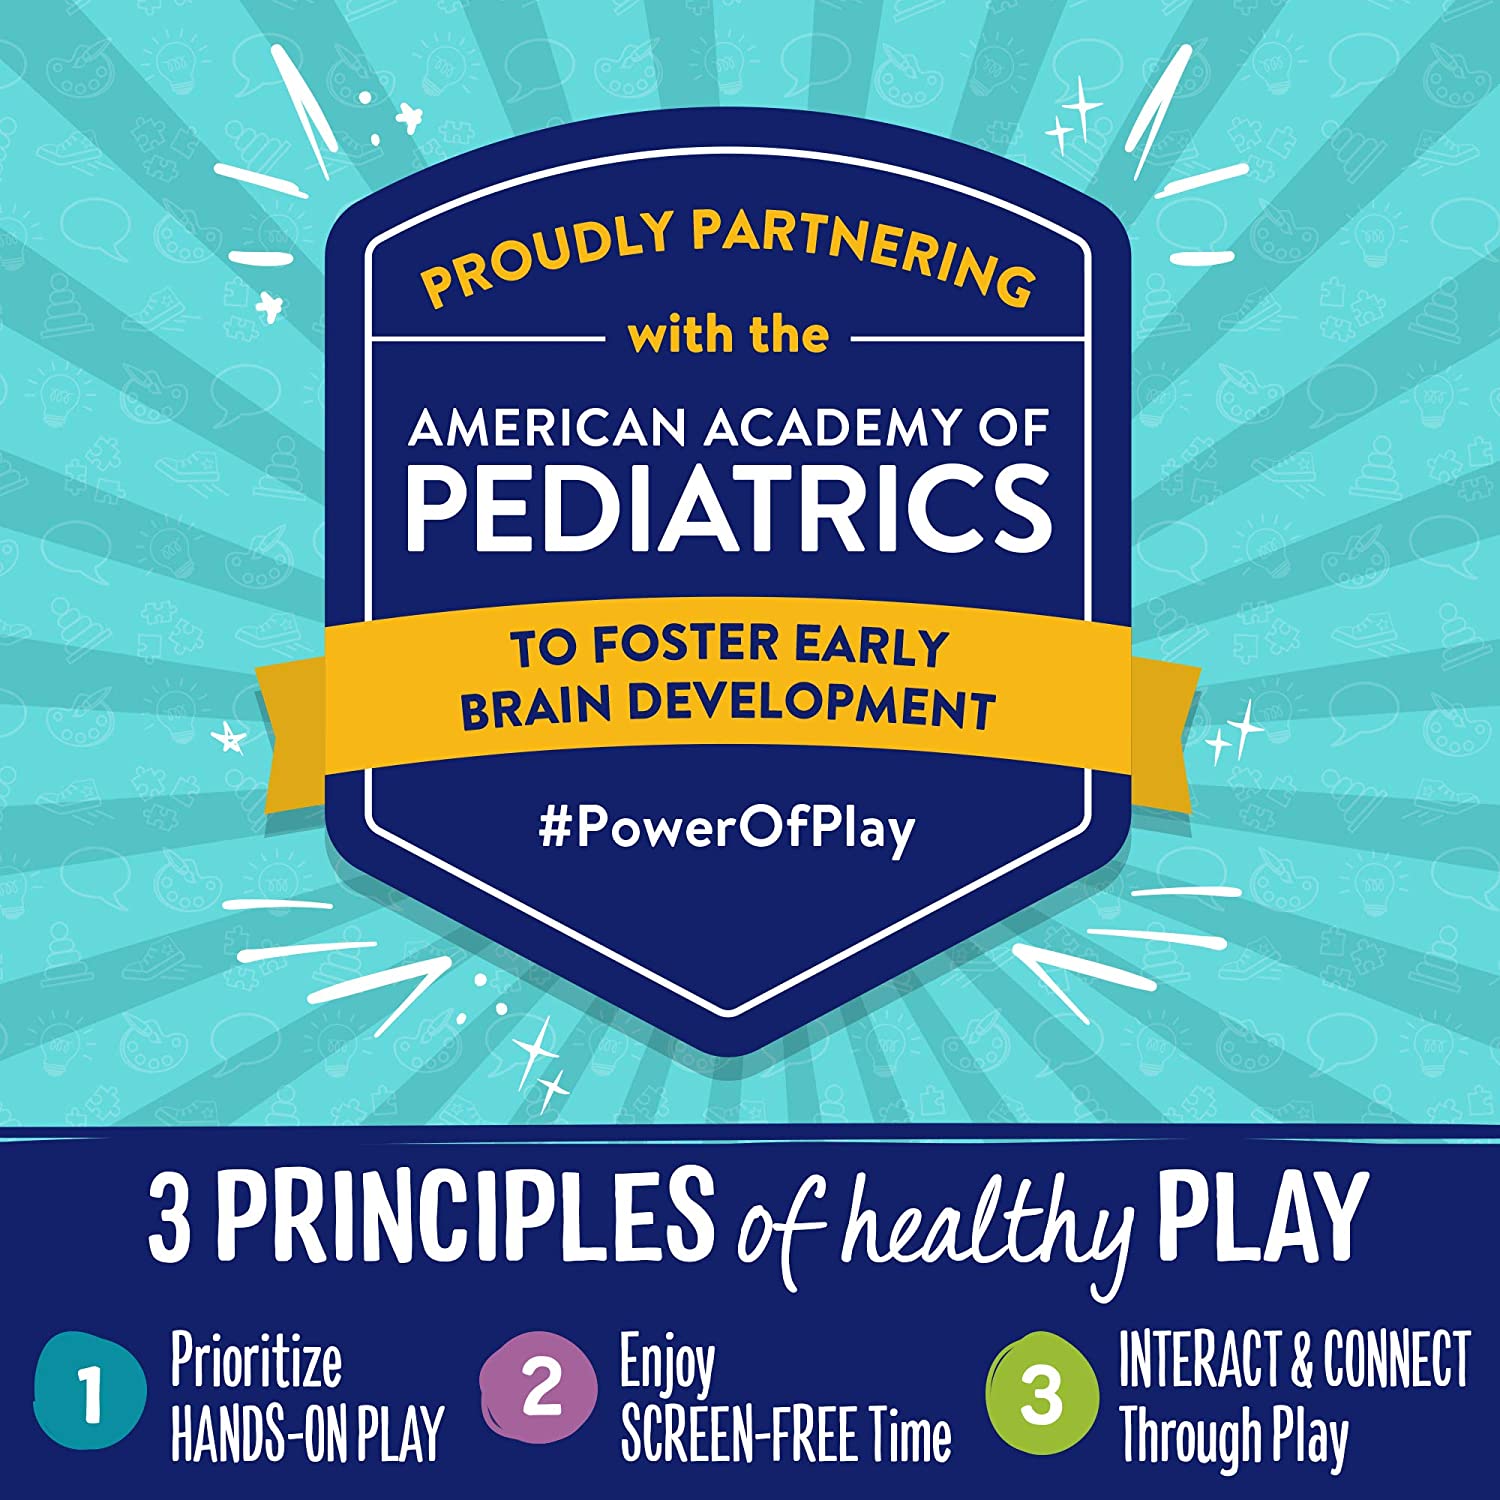 Approved by American Academy of Pediatrics